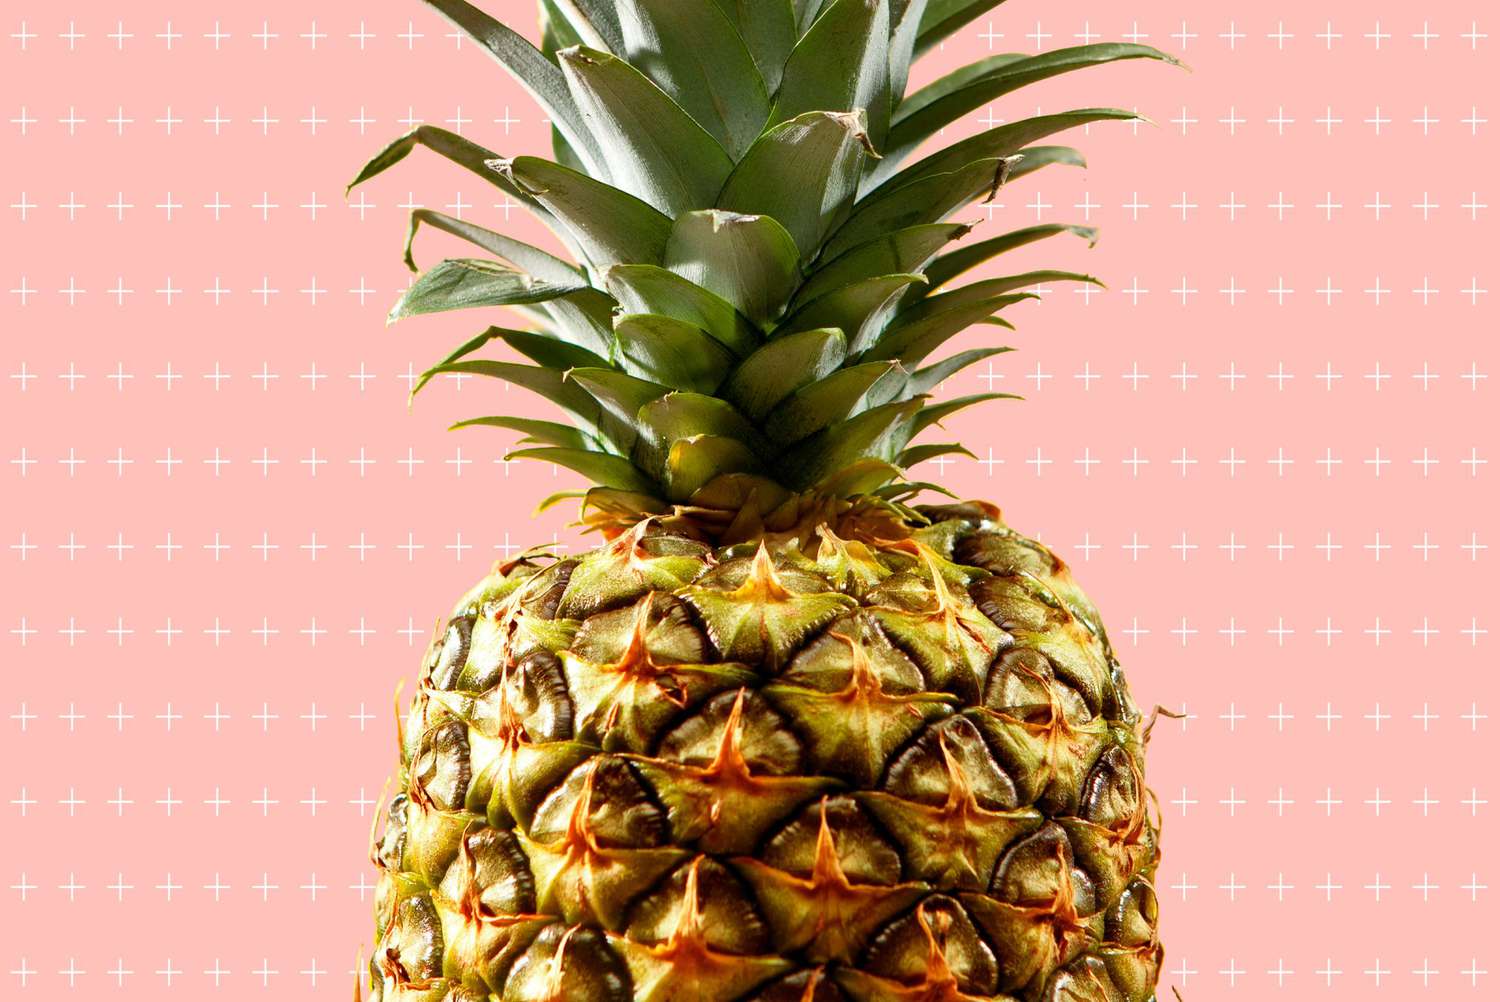 pineapple in front of plus signs